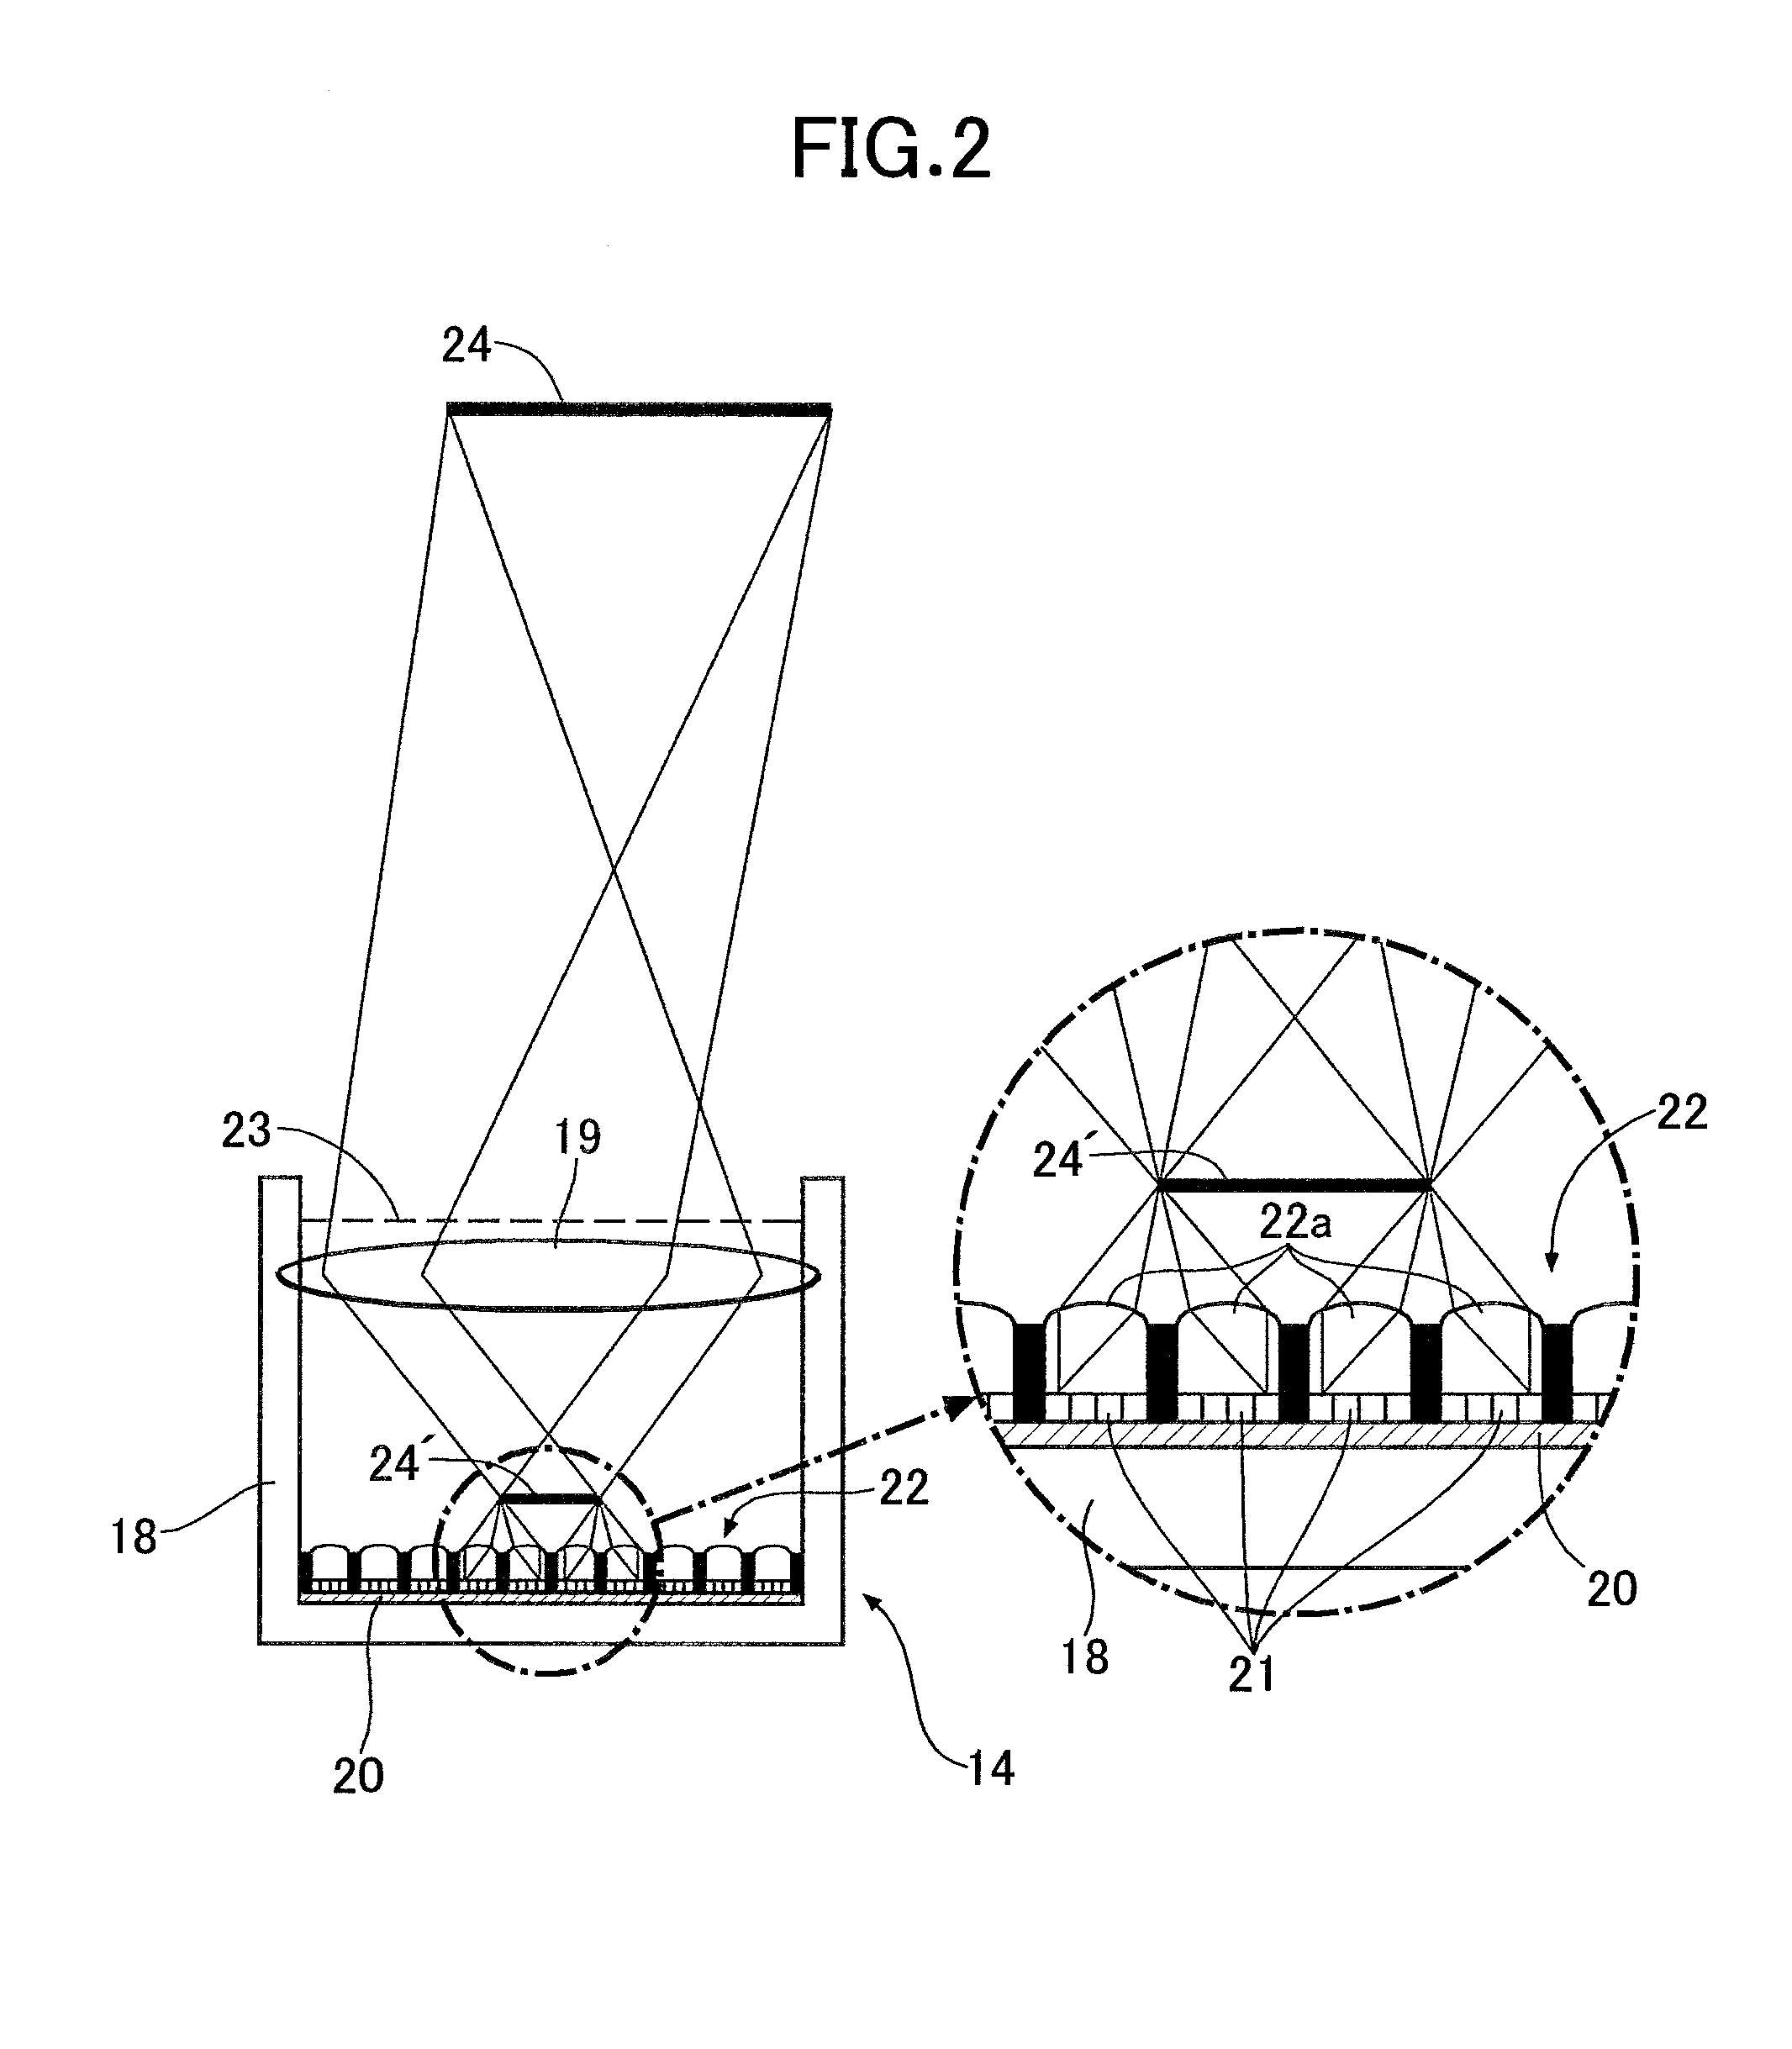 Particle image velocimetry system for three-dimensional space